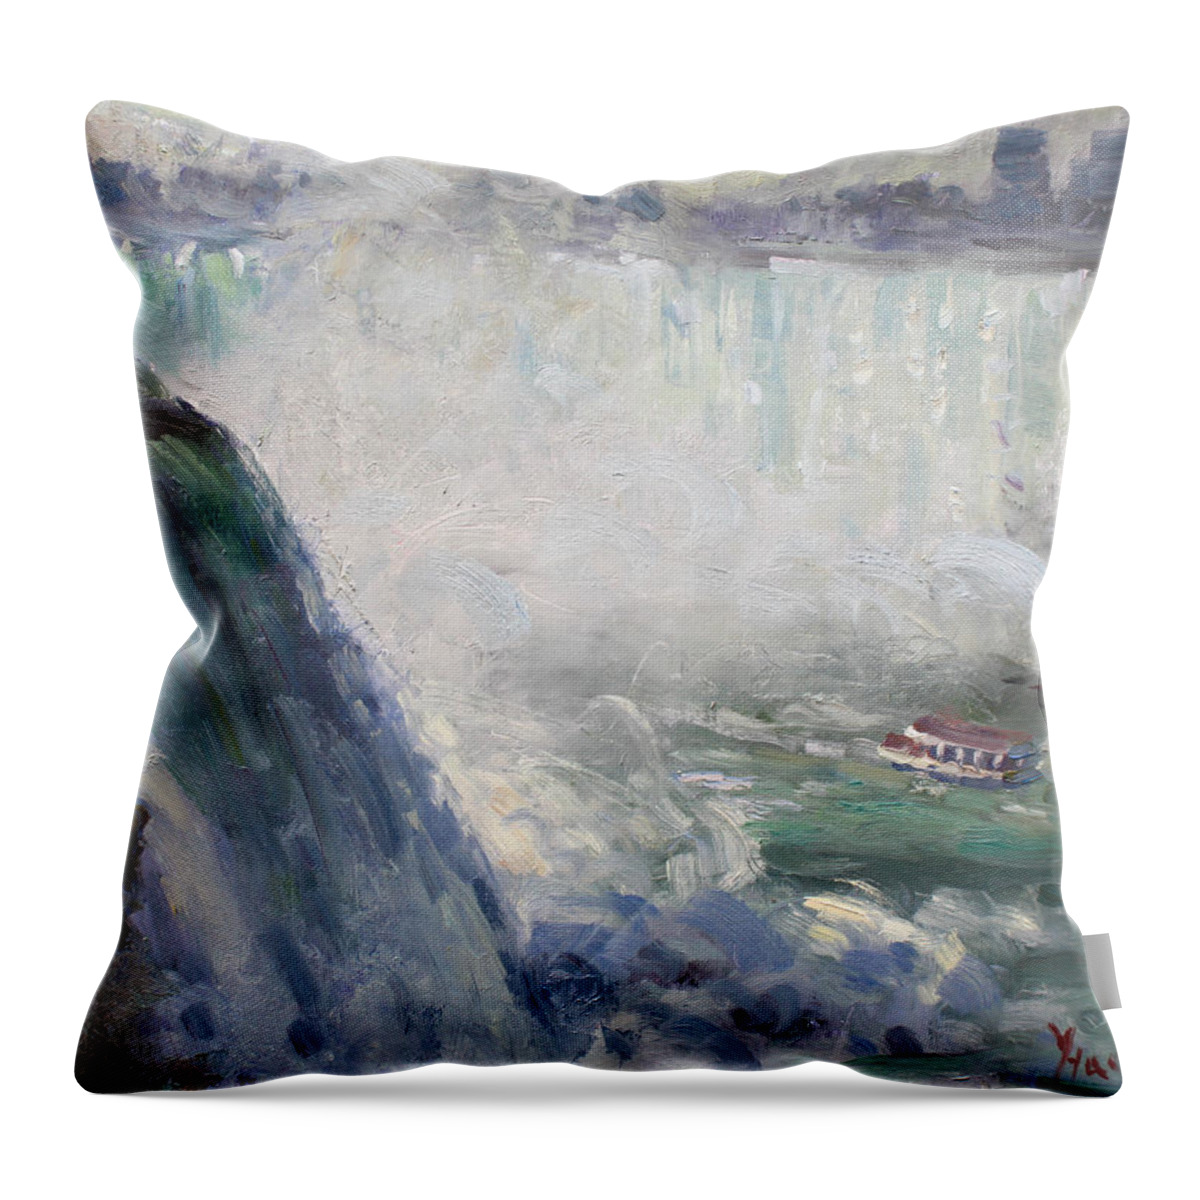 Maid Of The Mist Throw Pillow featuring the painting Maid of the Mist by Ylli Haruni